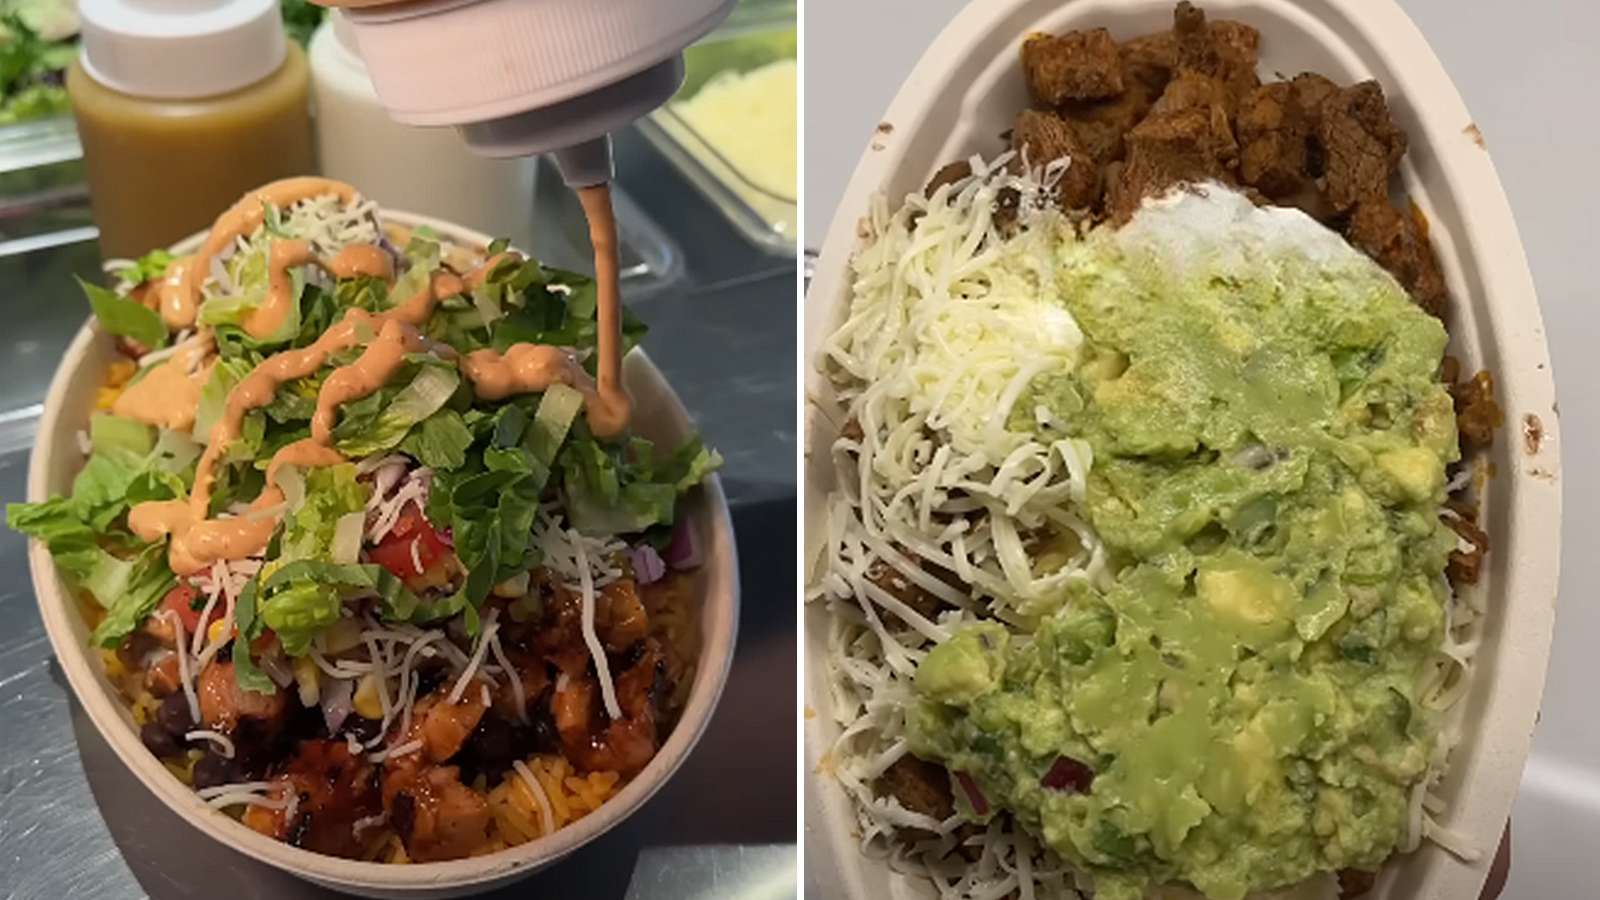 reddit-user-convinced-chipotle-employees-selling-own-food-viral